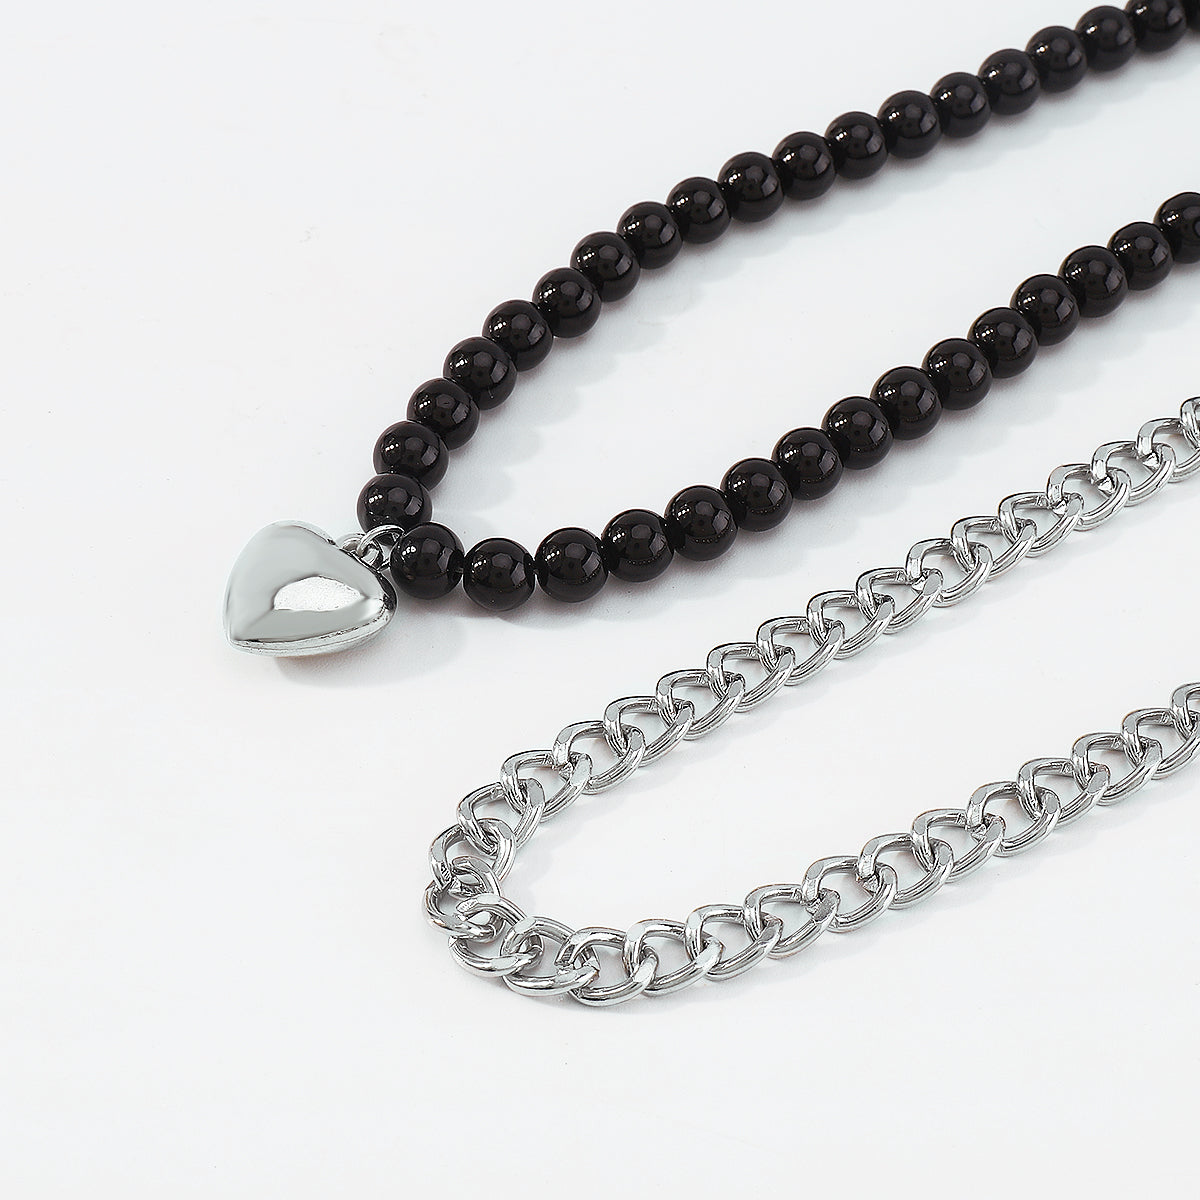 N10411 Black Beads Chain Collar Heart Pendant Necklace